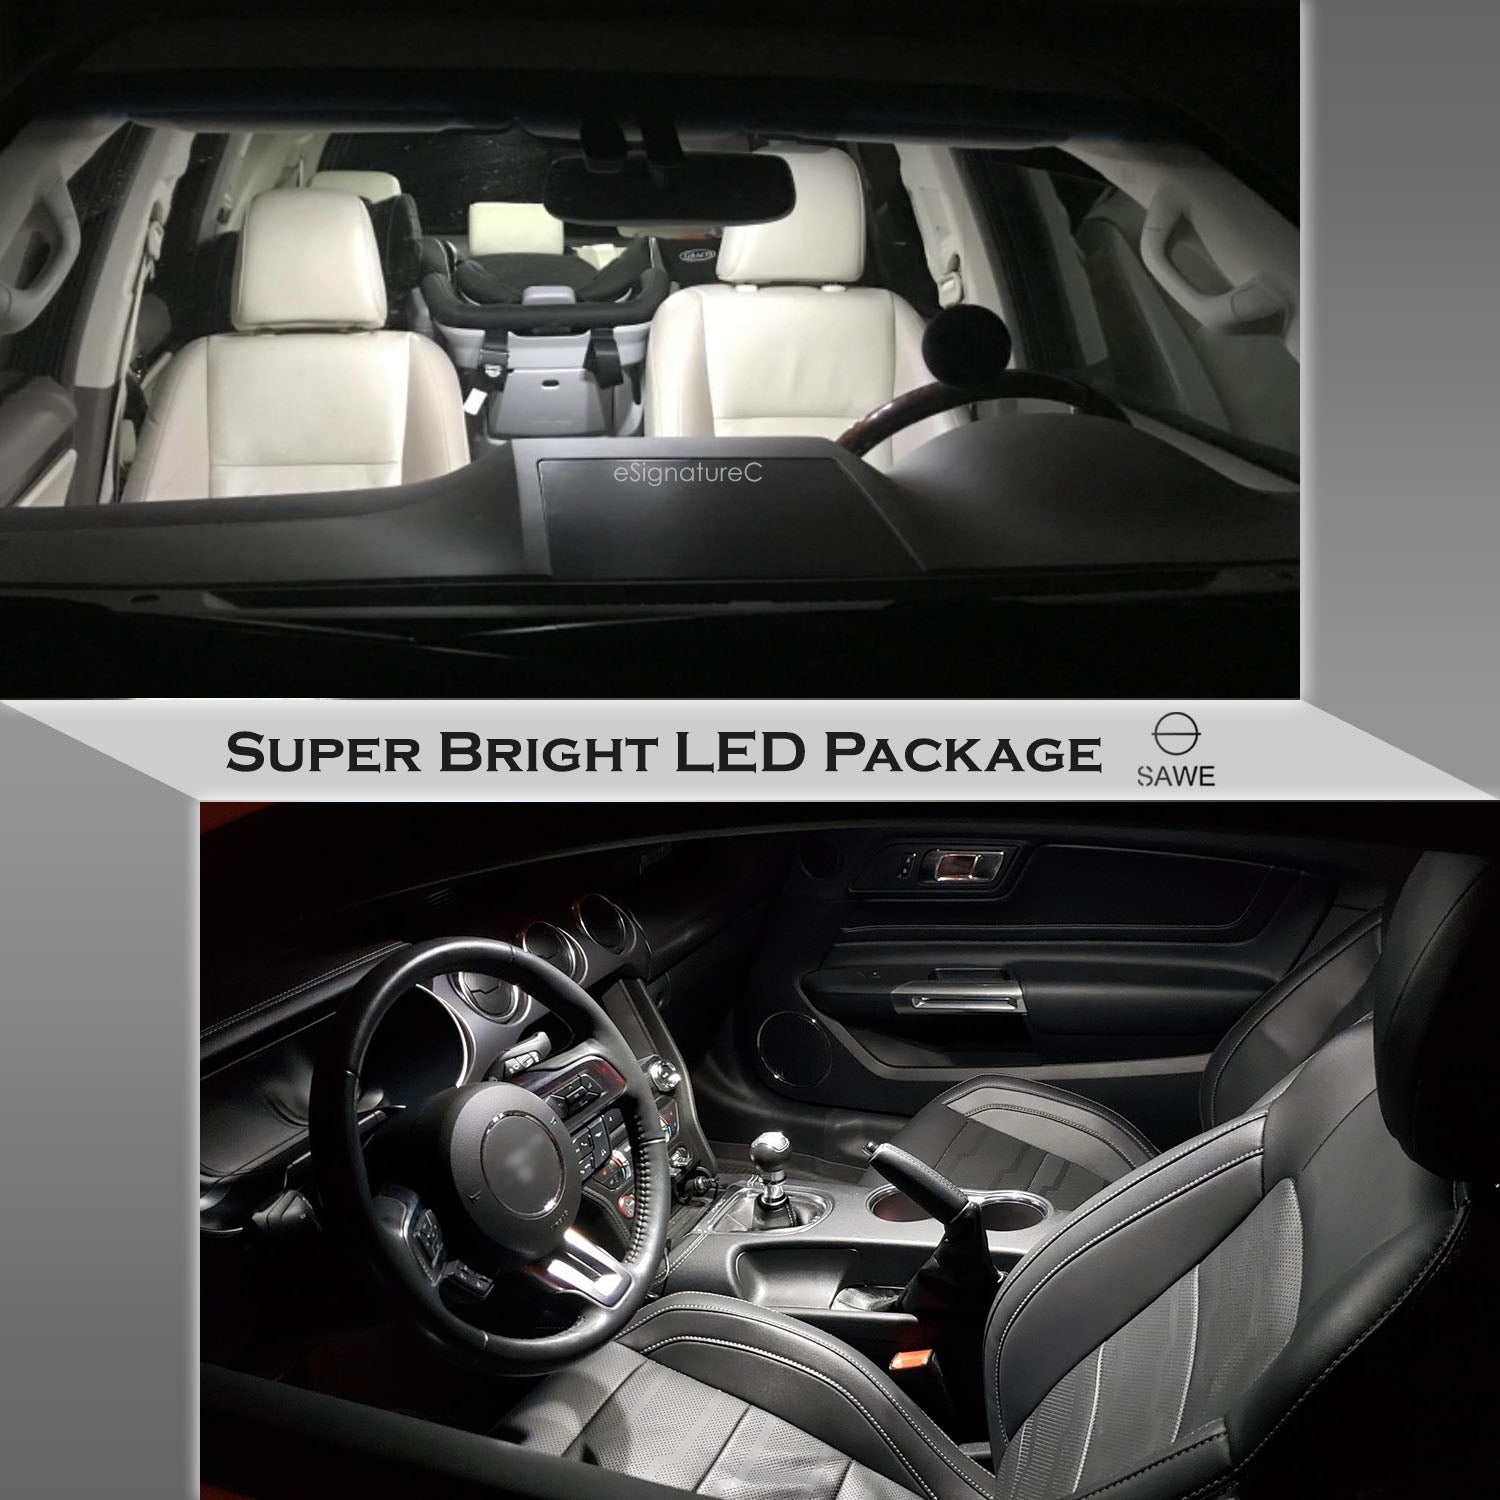 For Audi A7 Interior LED Lights - Dome & Map Light Bulb Package Kit for 2012 - 2016 - White